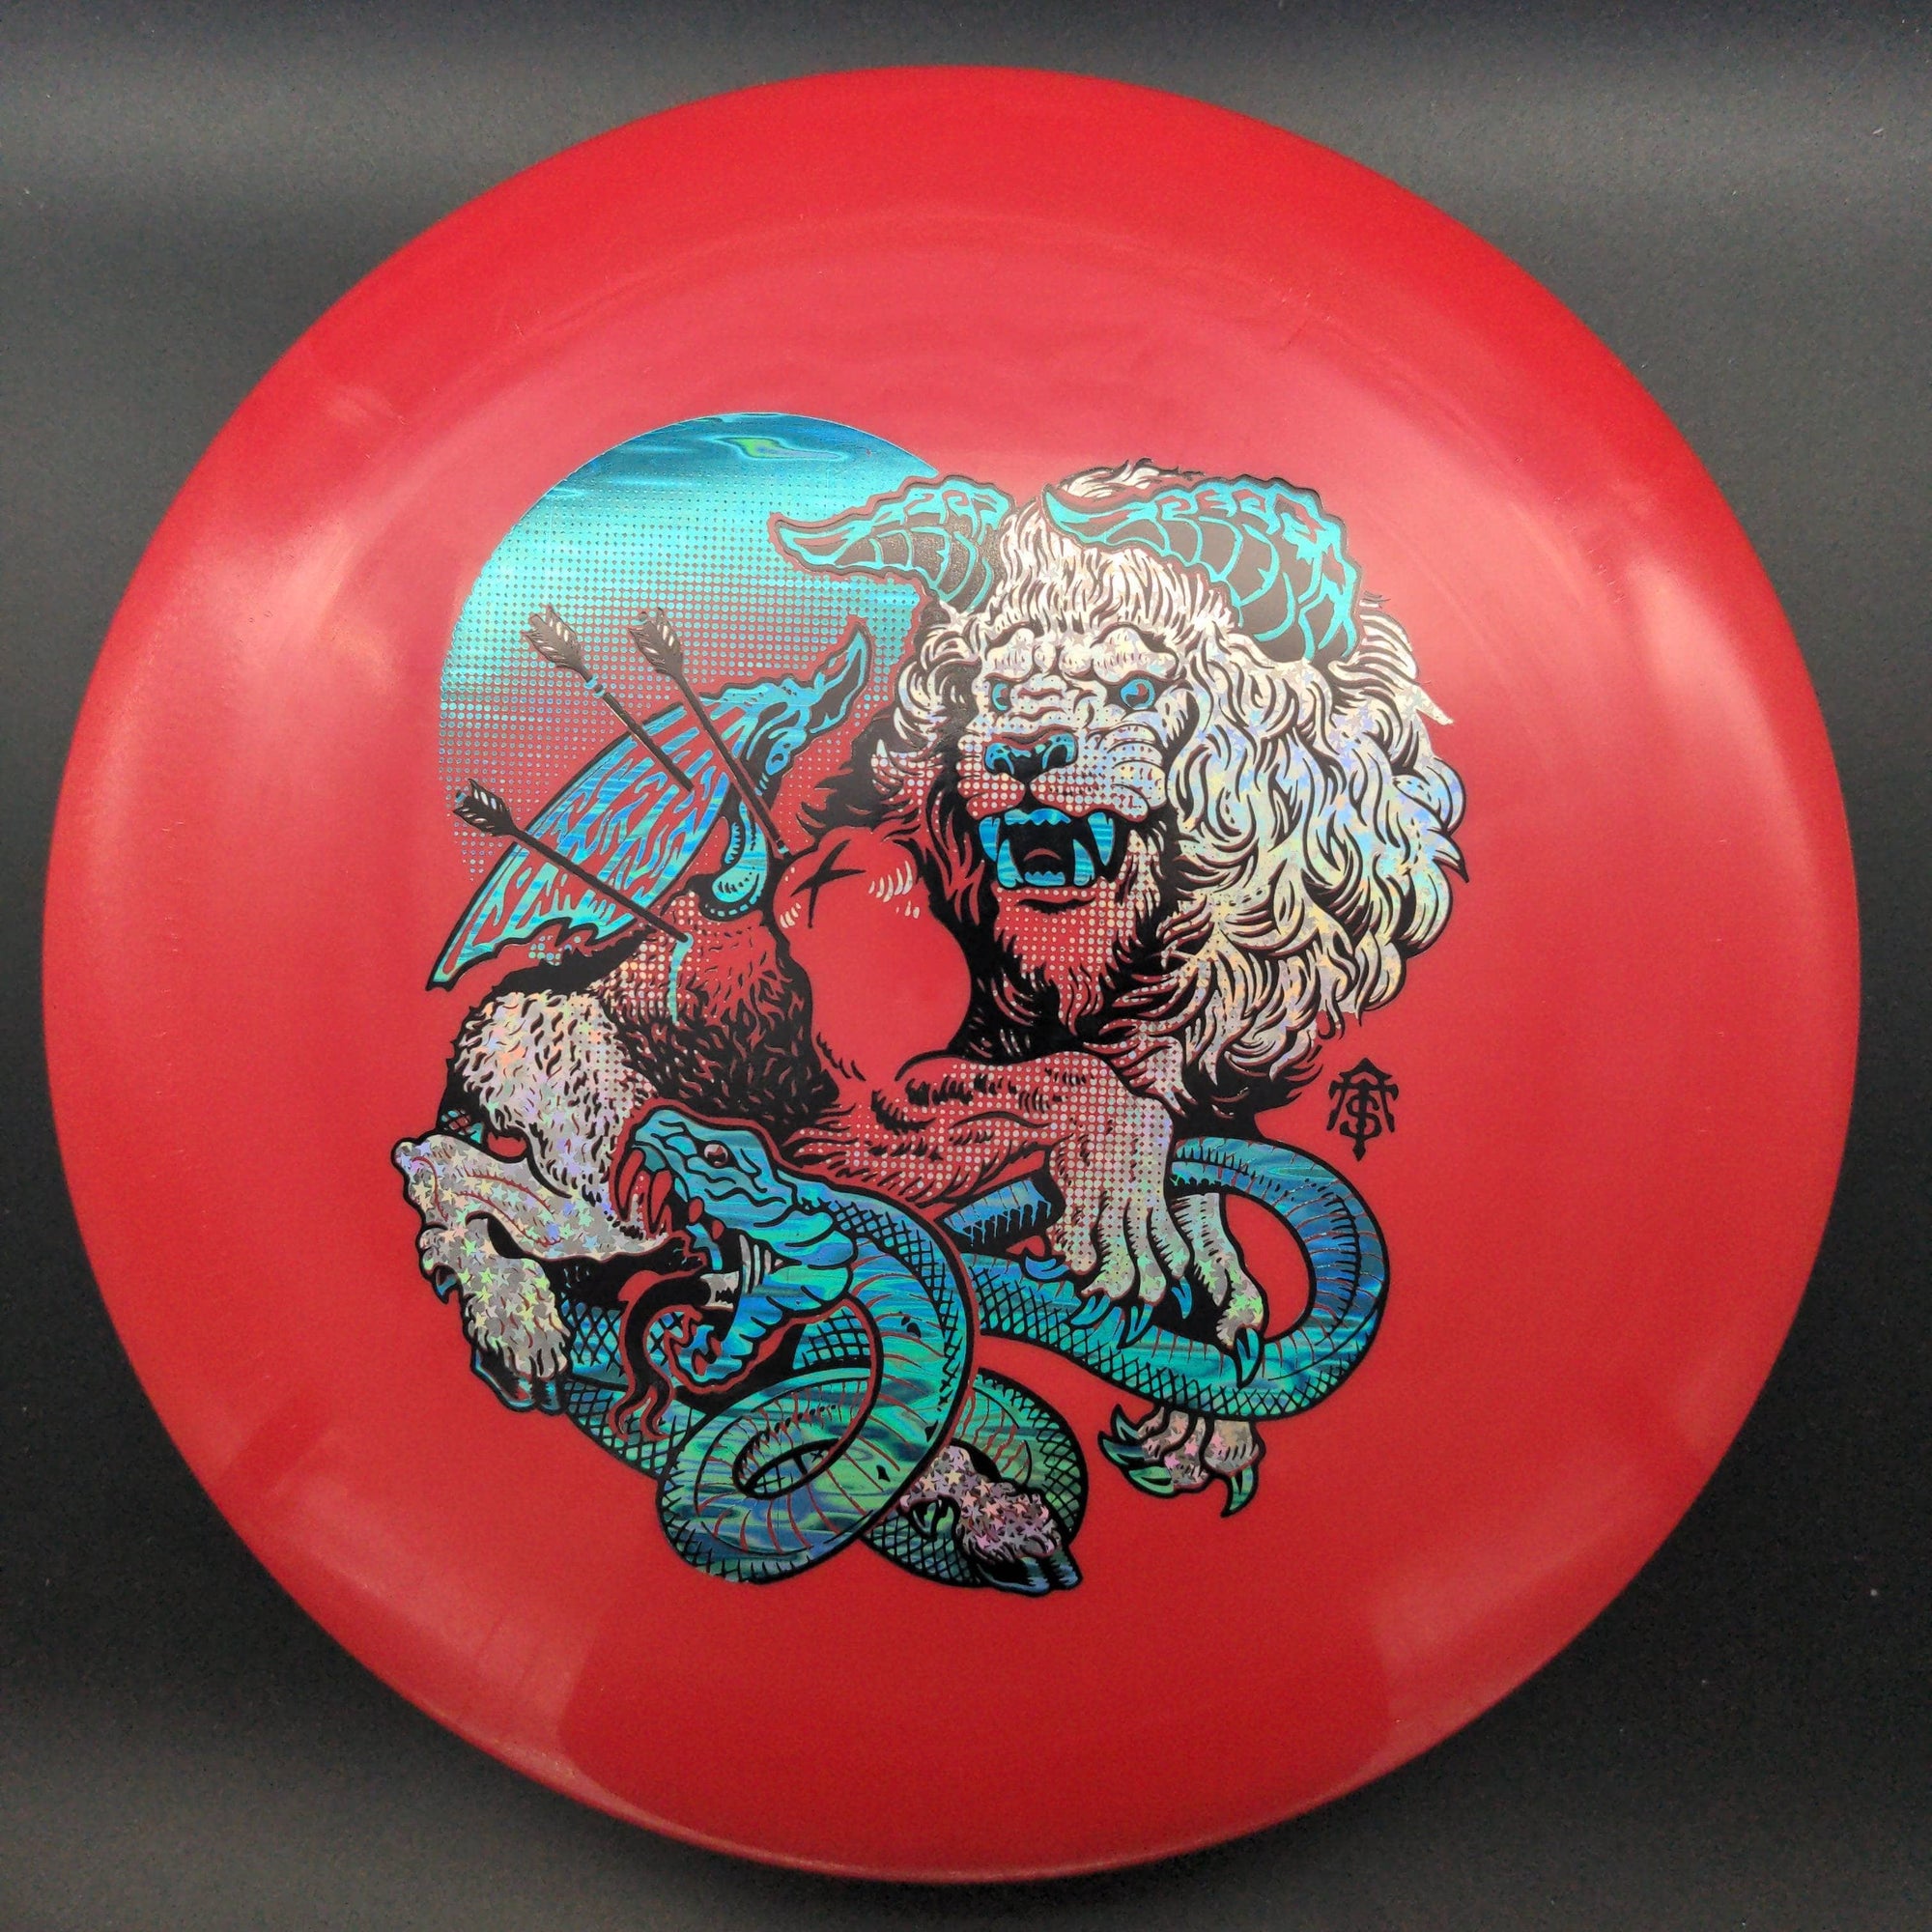 Infinite Discs Distance Driver Emperor, G-Line, Thought Space Stamp